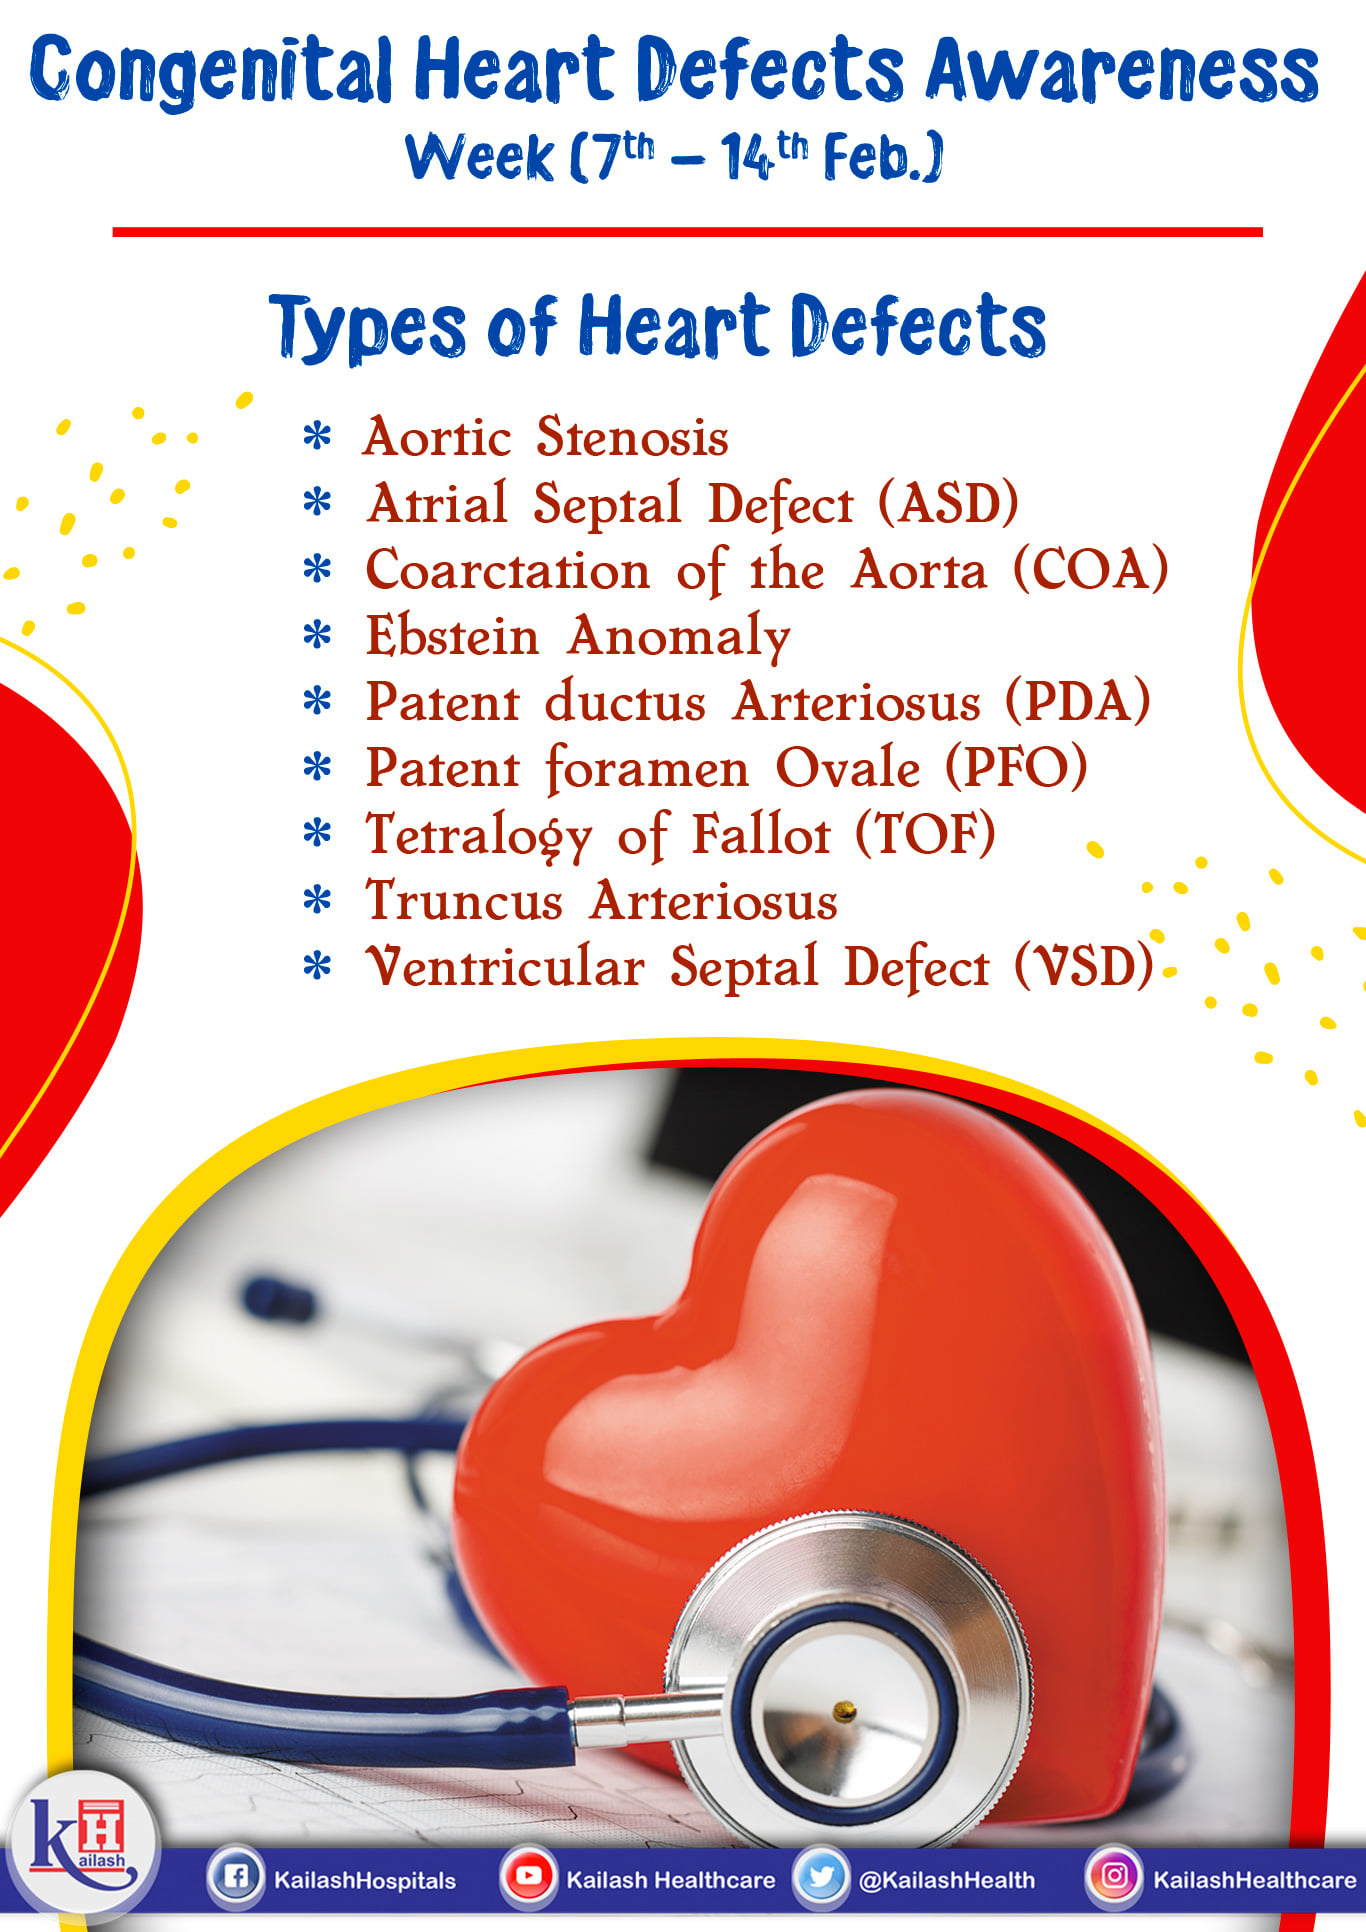 Various Heart Defects can differ in their symptoms & complications, while early diagnosis can help in better management.